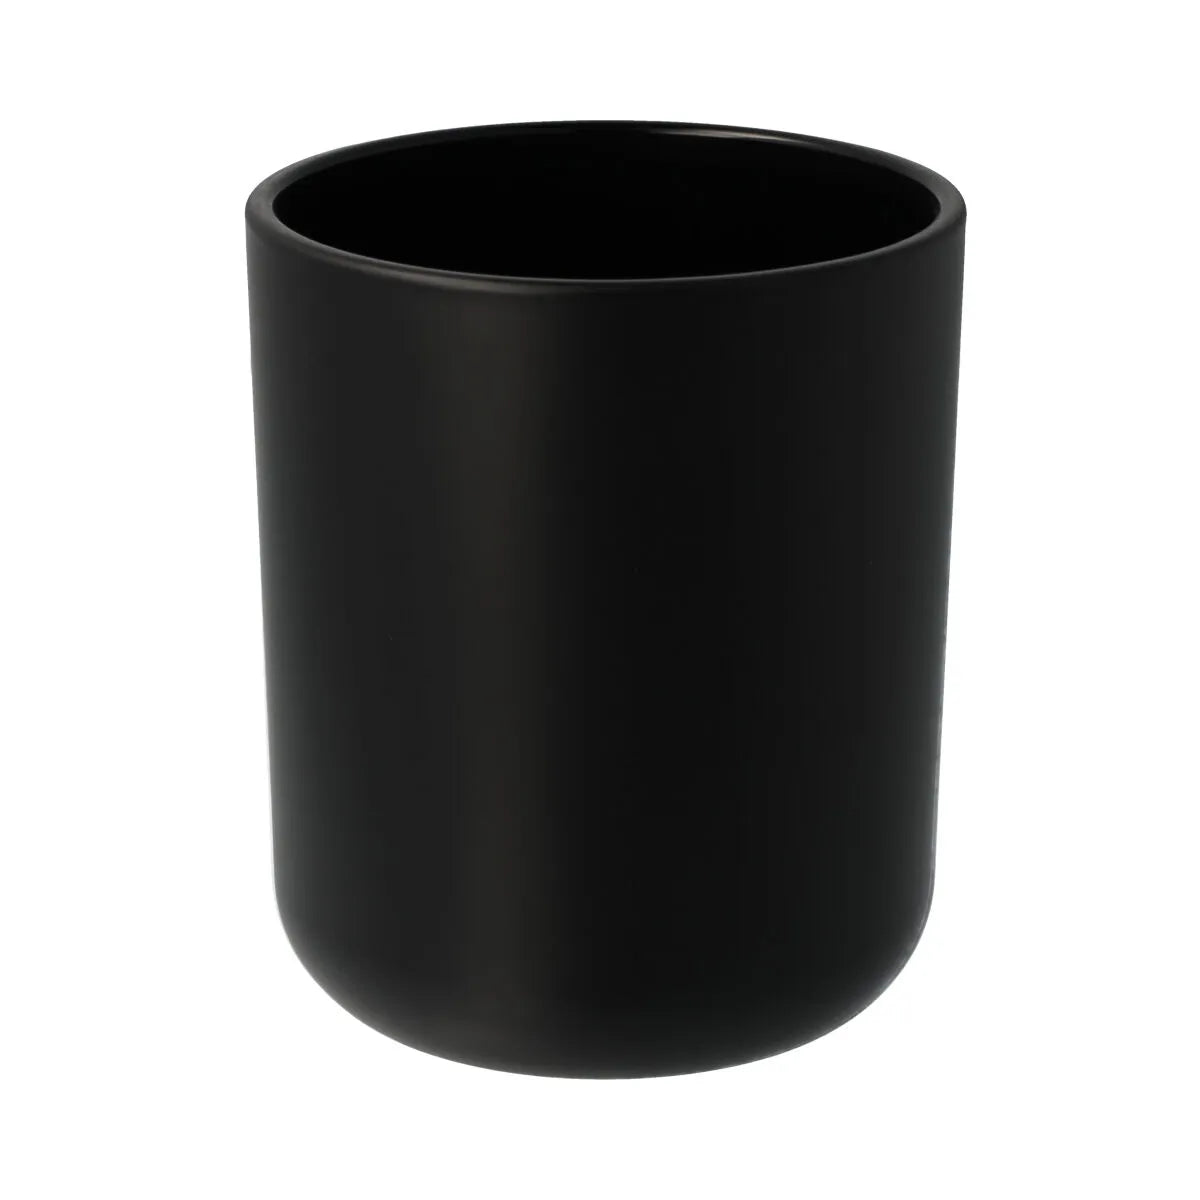 The Alpha Male Medium Soy Candle